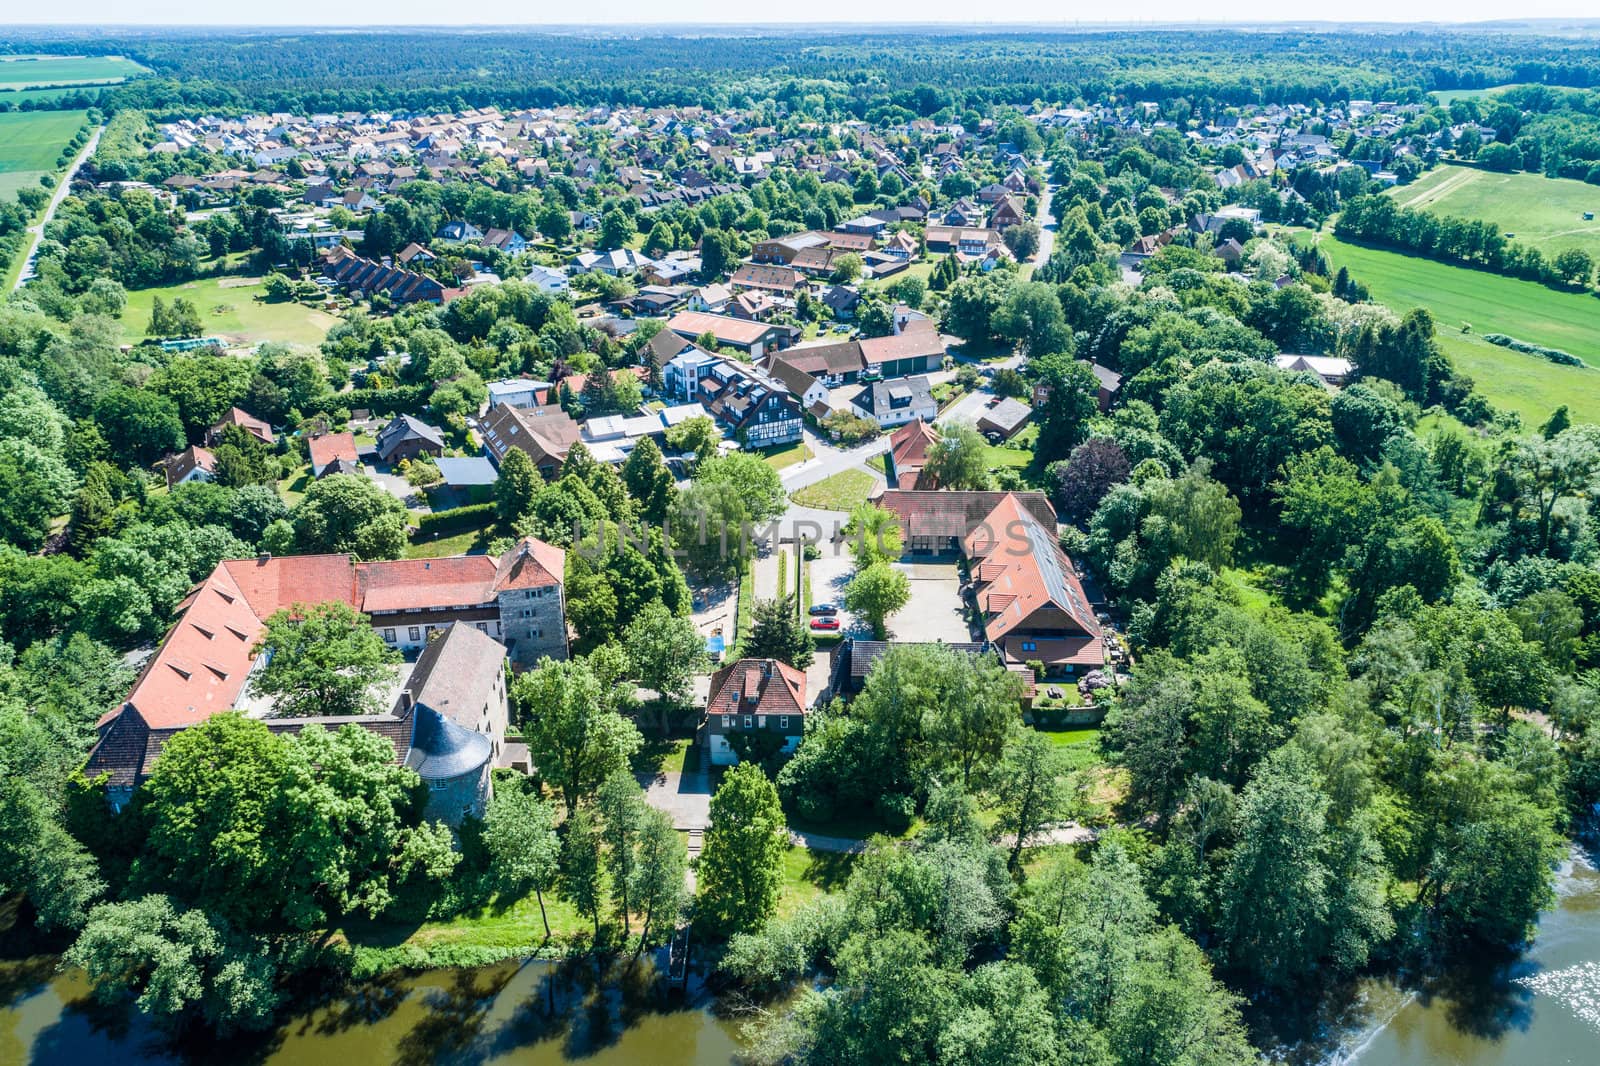 Aerial view of a German village with a small forest, a pond and a moated castle in the foreground by geogif